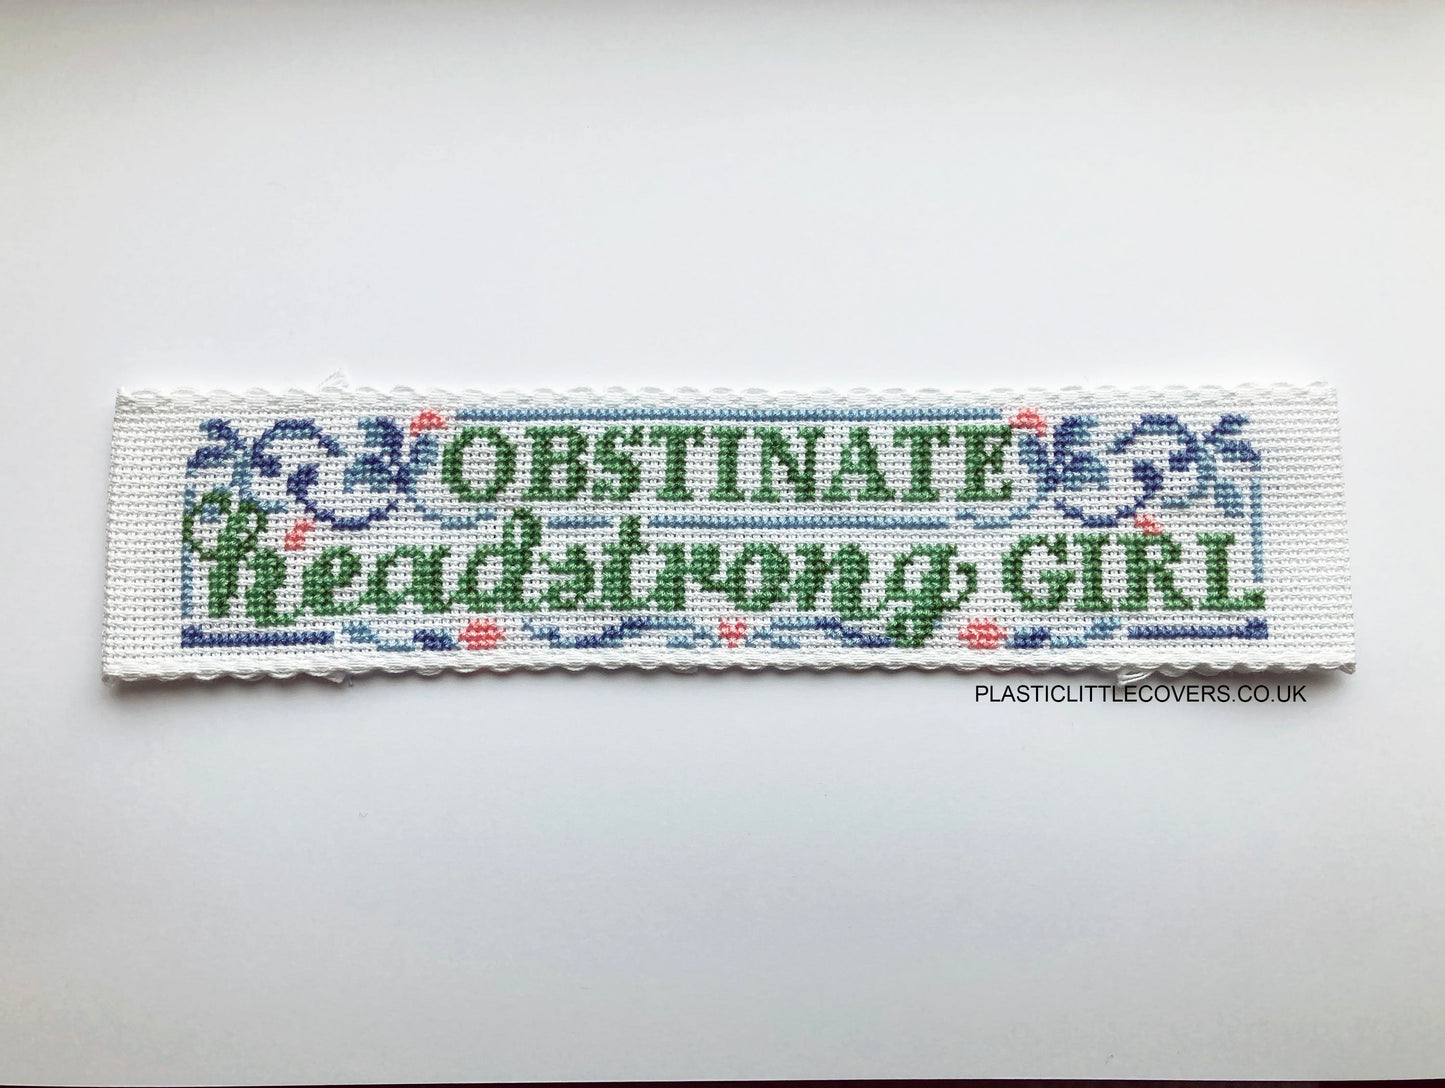 SECONDS SALE Cross Stitch Bookmark Kit - Obstinate Headstrong Girl